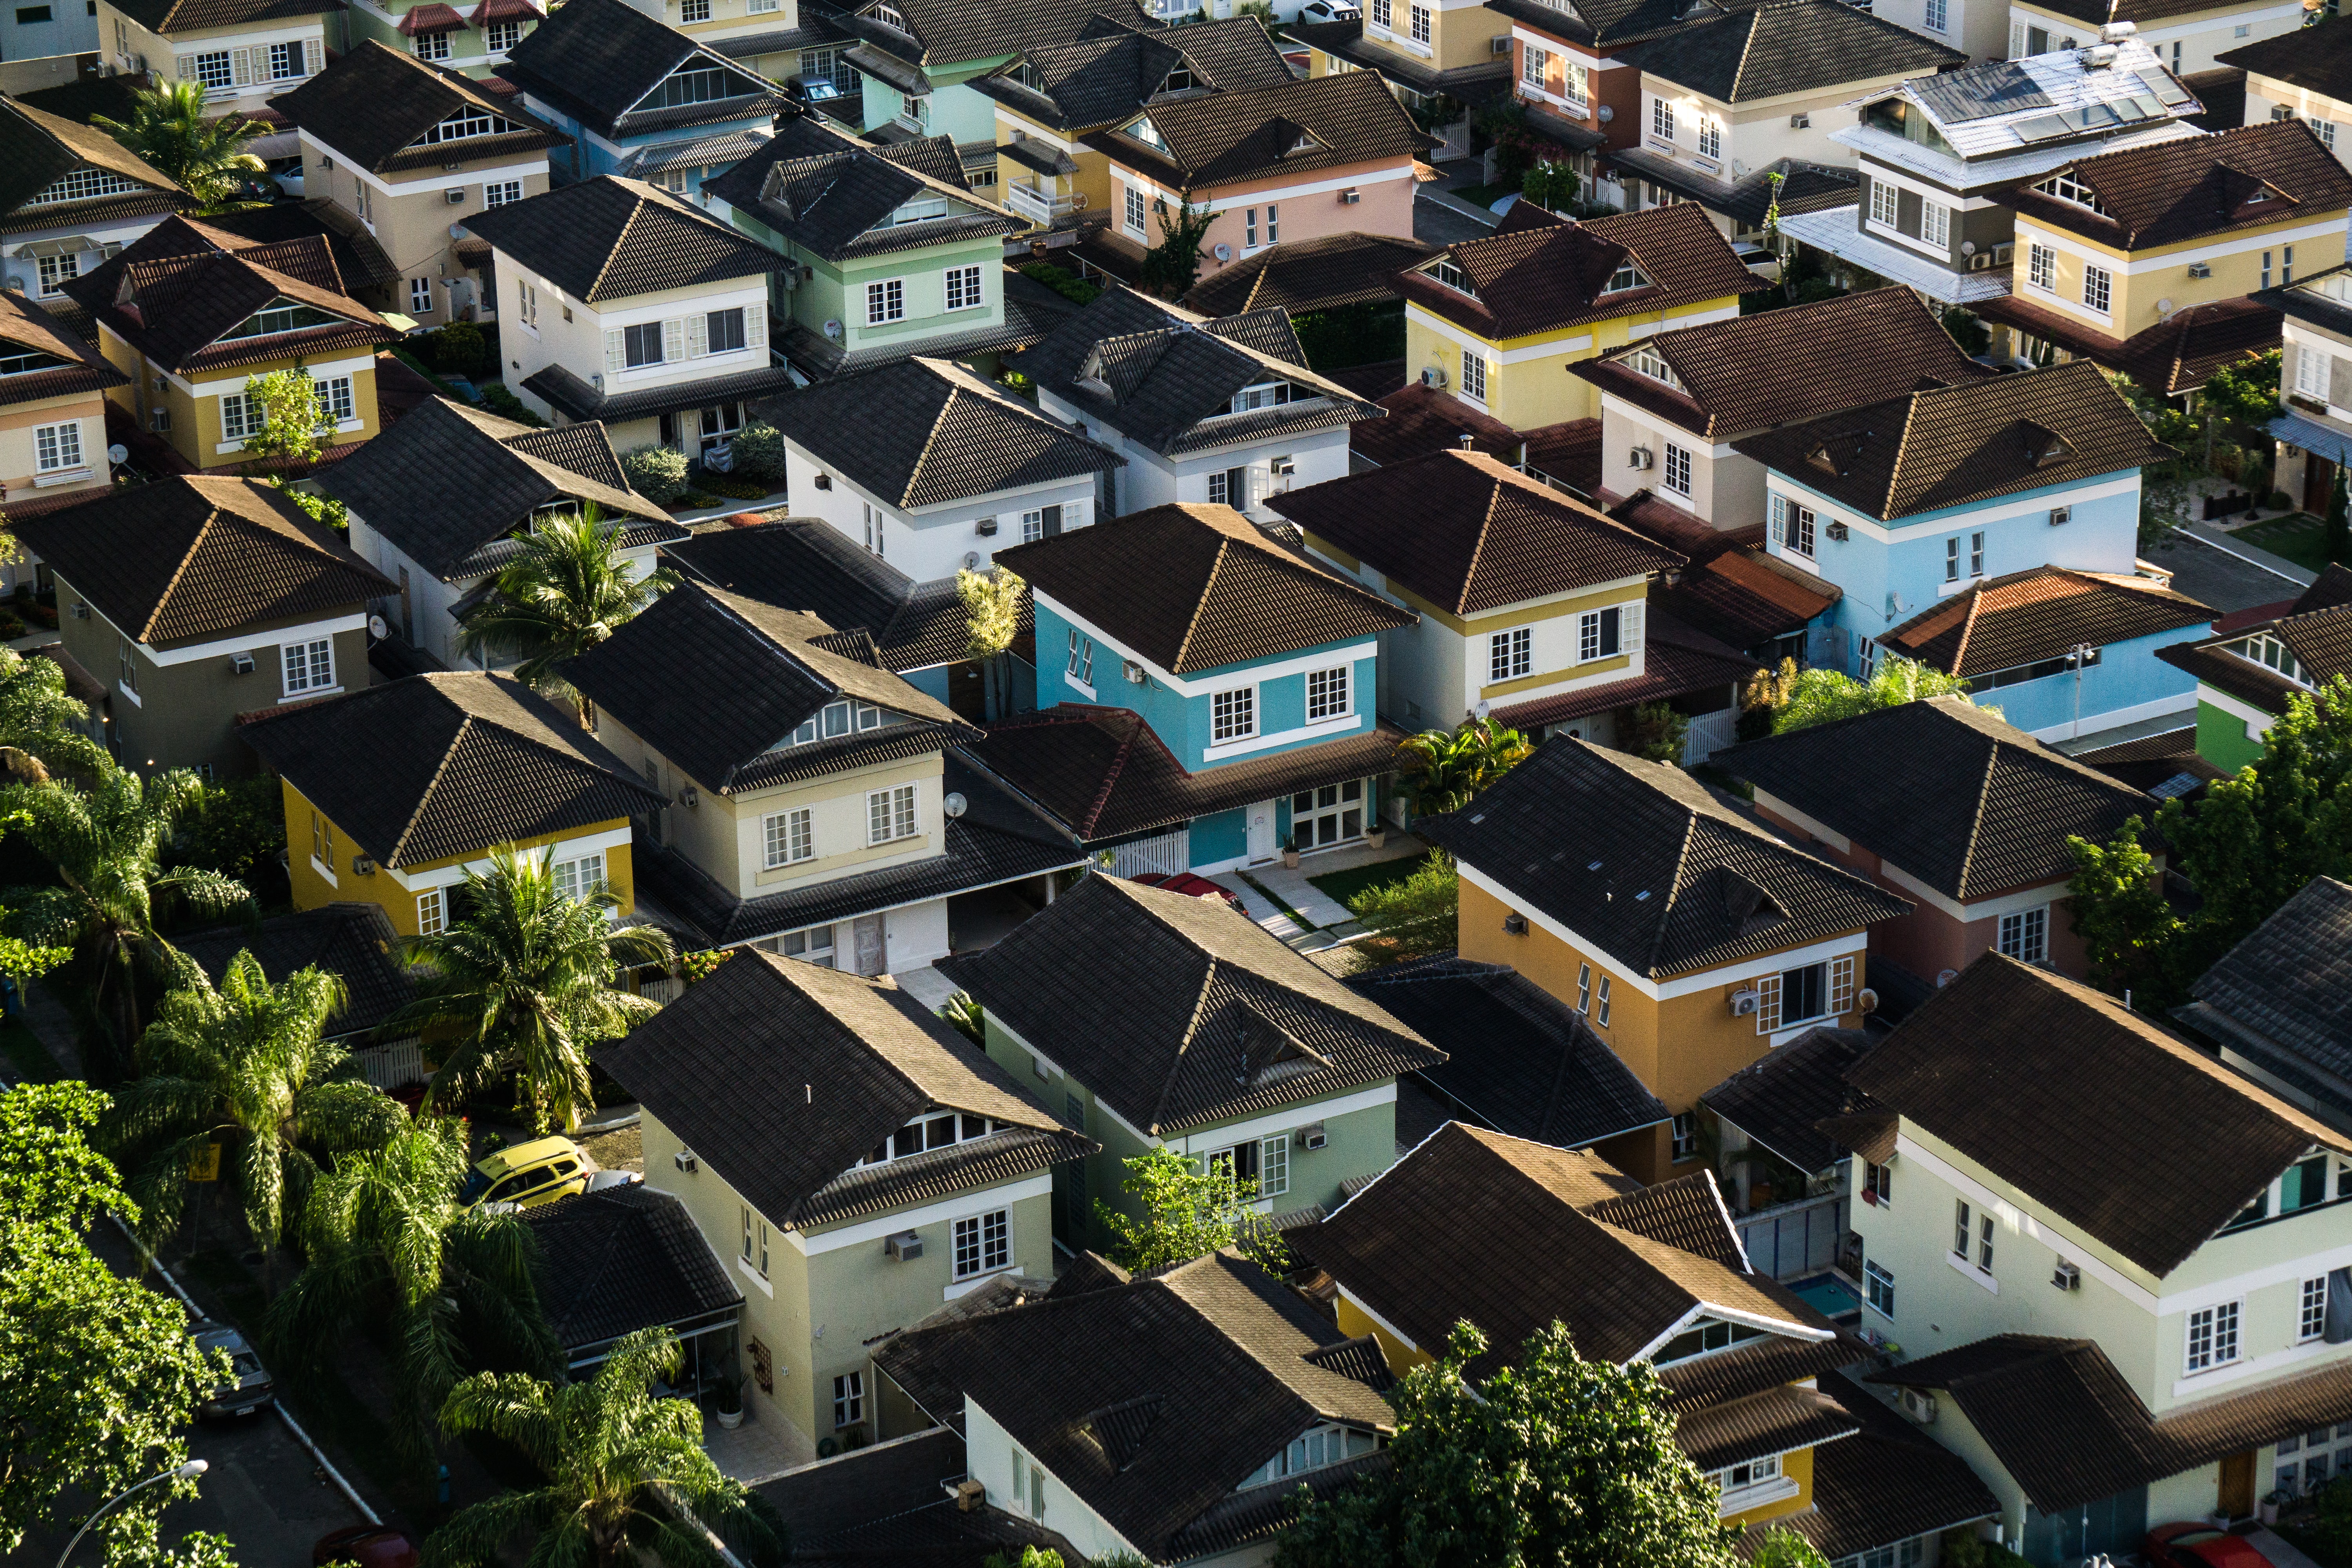 Arial shot of house rooftops - Photo by Breno Assis on Unsplash